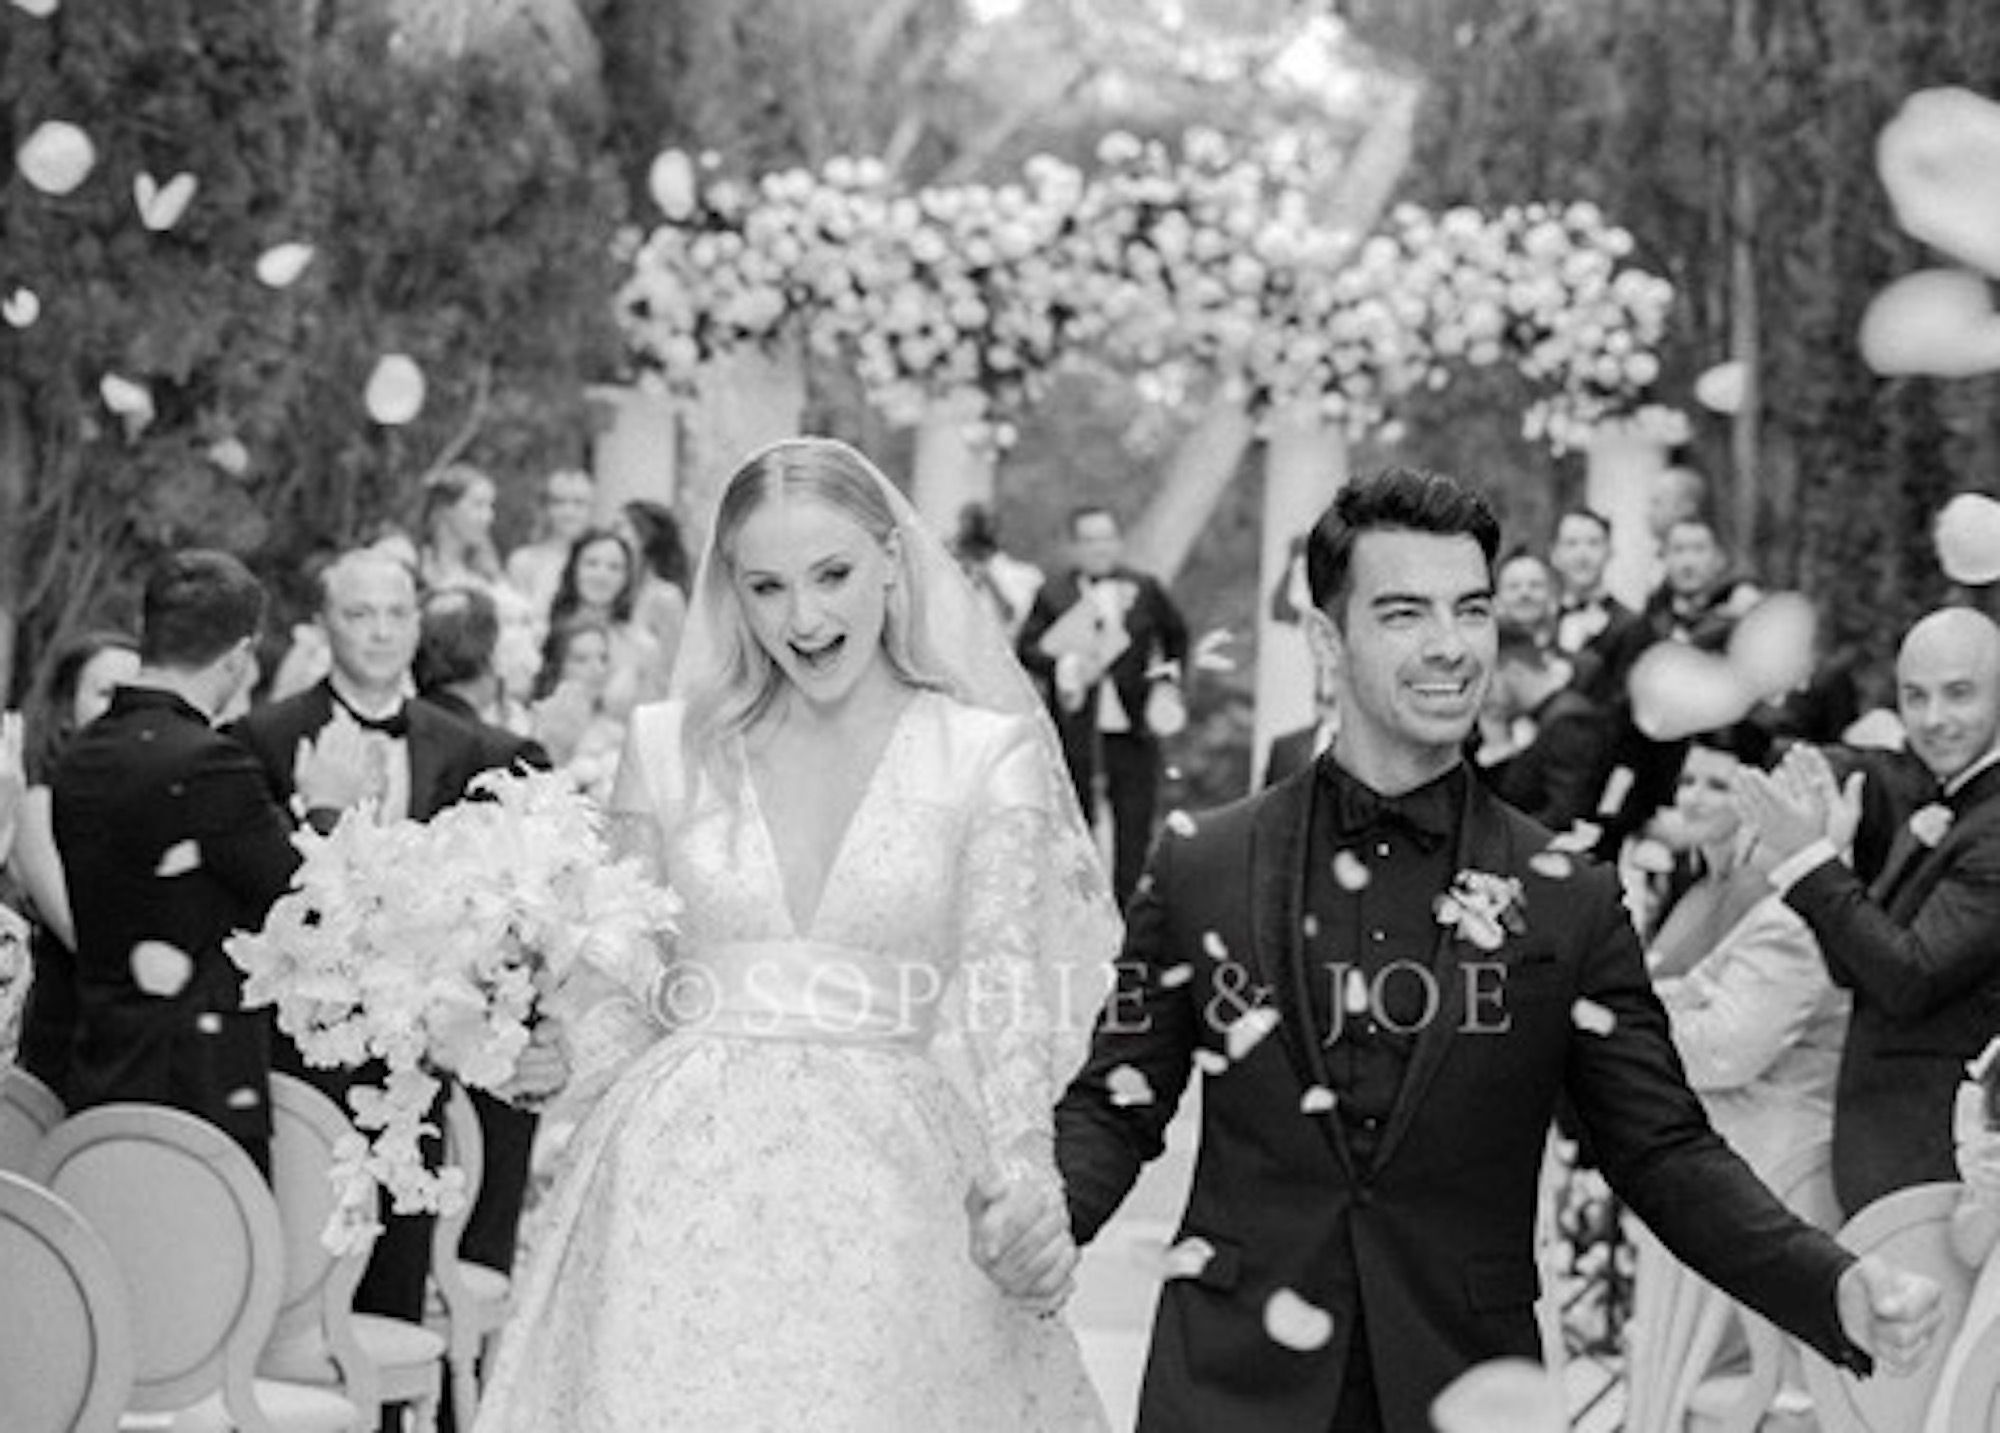 Sophie Turner's wedding dress is a stunning Louis Vuitton lace